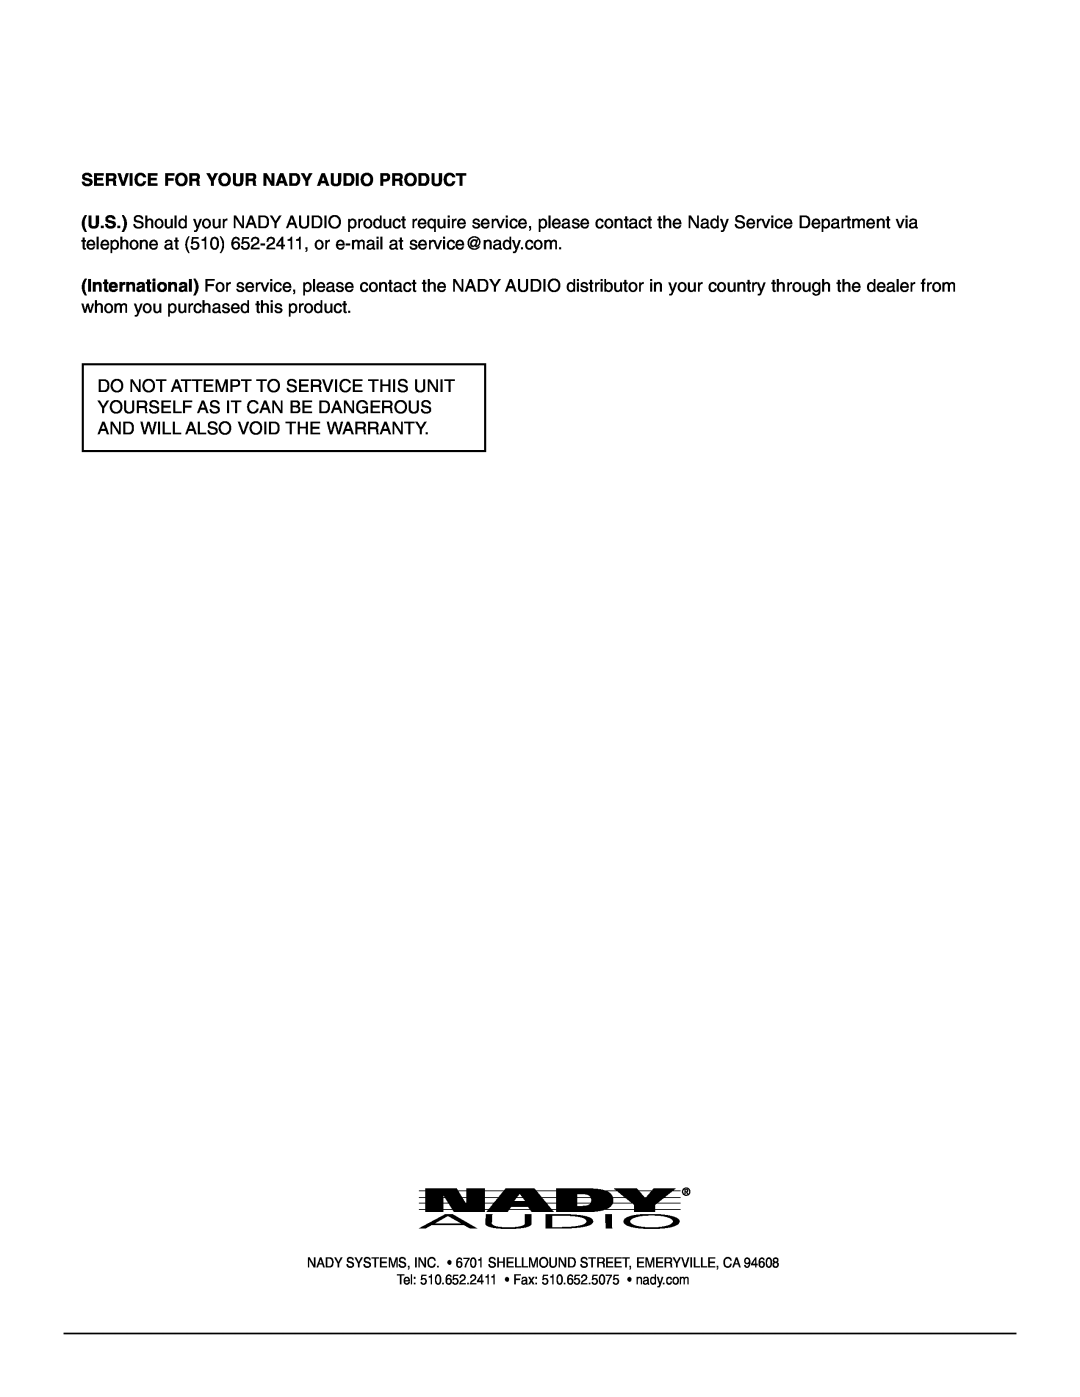 Nady Systems PMX-600 6, PMX-1600 16 owner manual Service For Your Nady Audio Product 